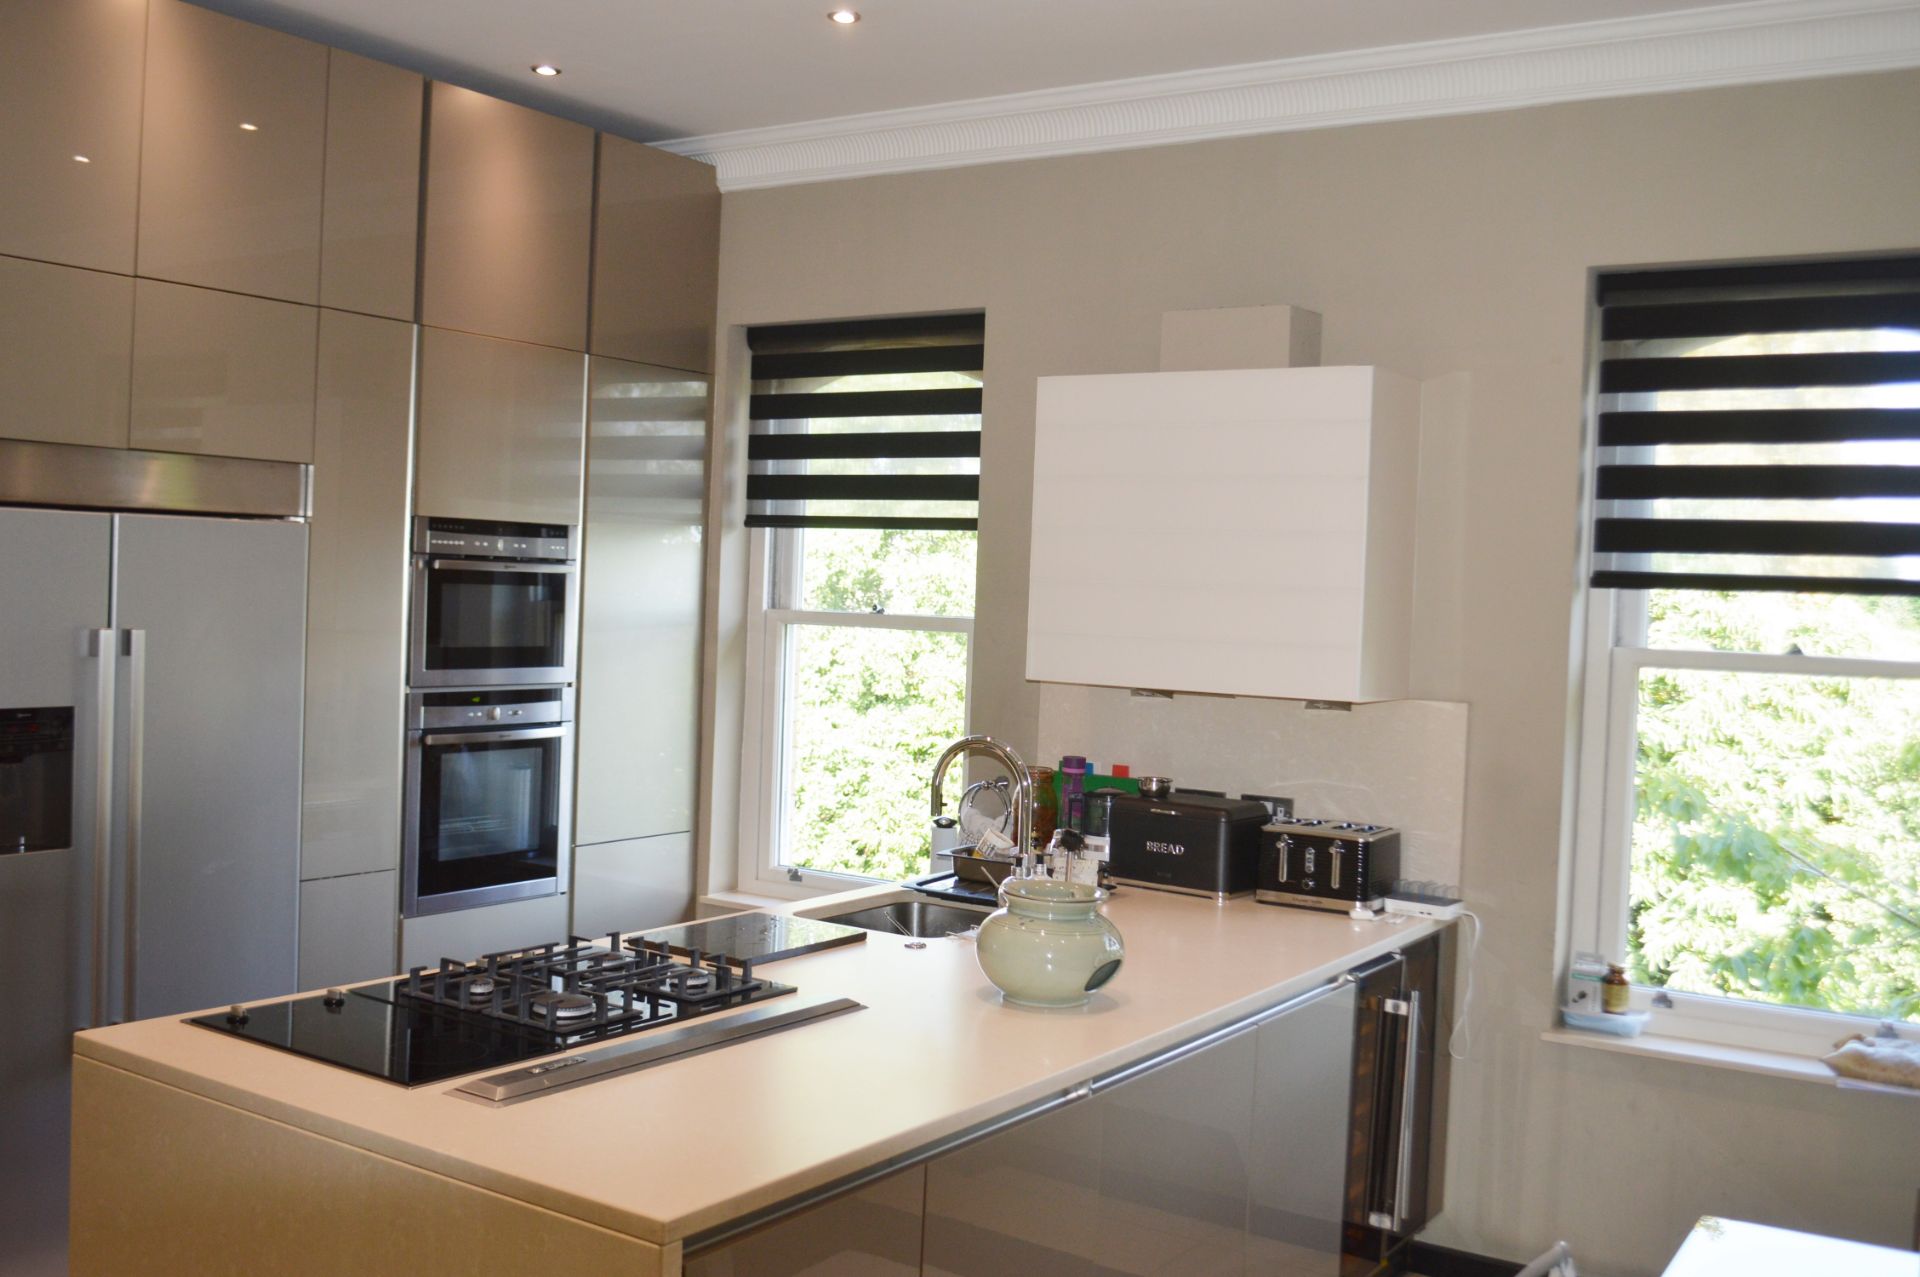 1 x Contemporary Bespoke Fitted Kitchen With Integrated Neff Branded Appliances To be removed from a - Image 10 of 37